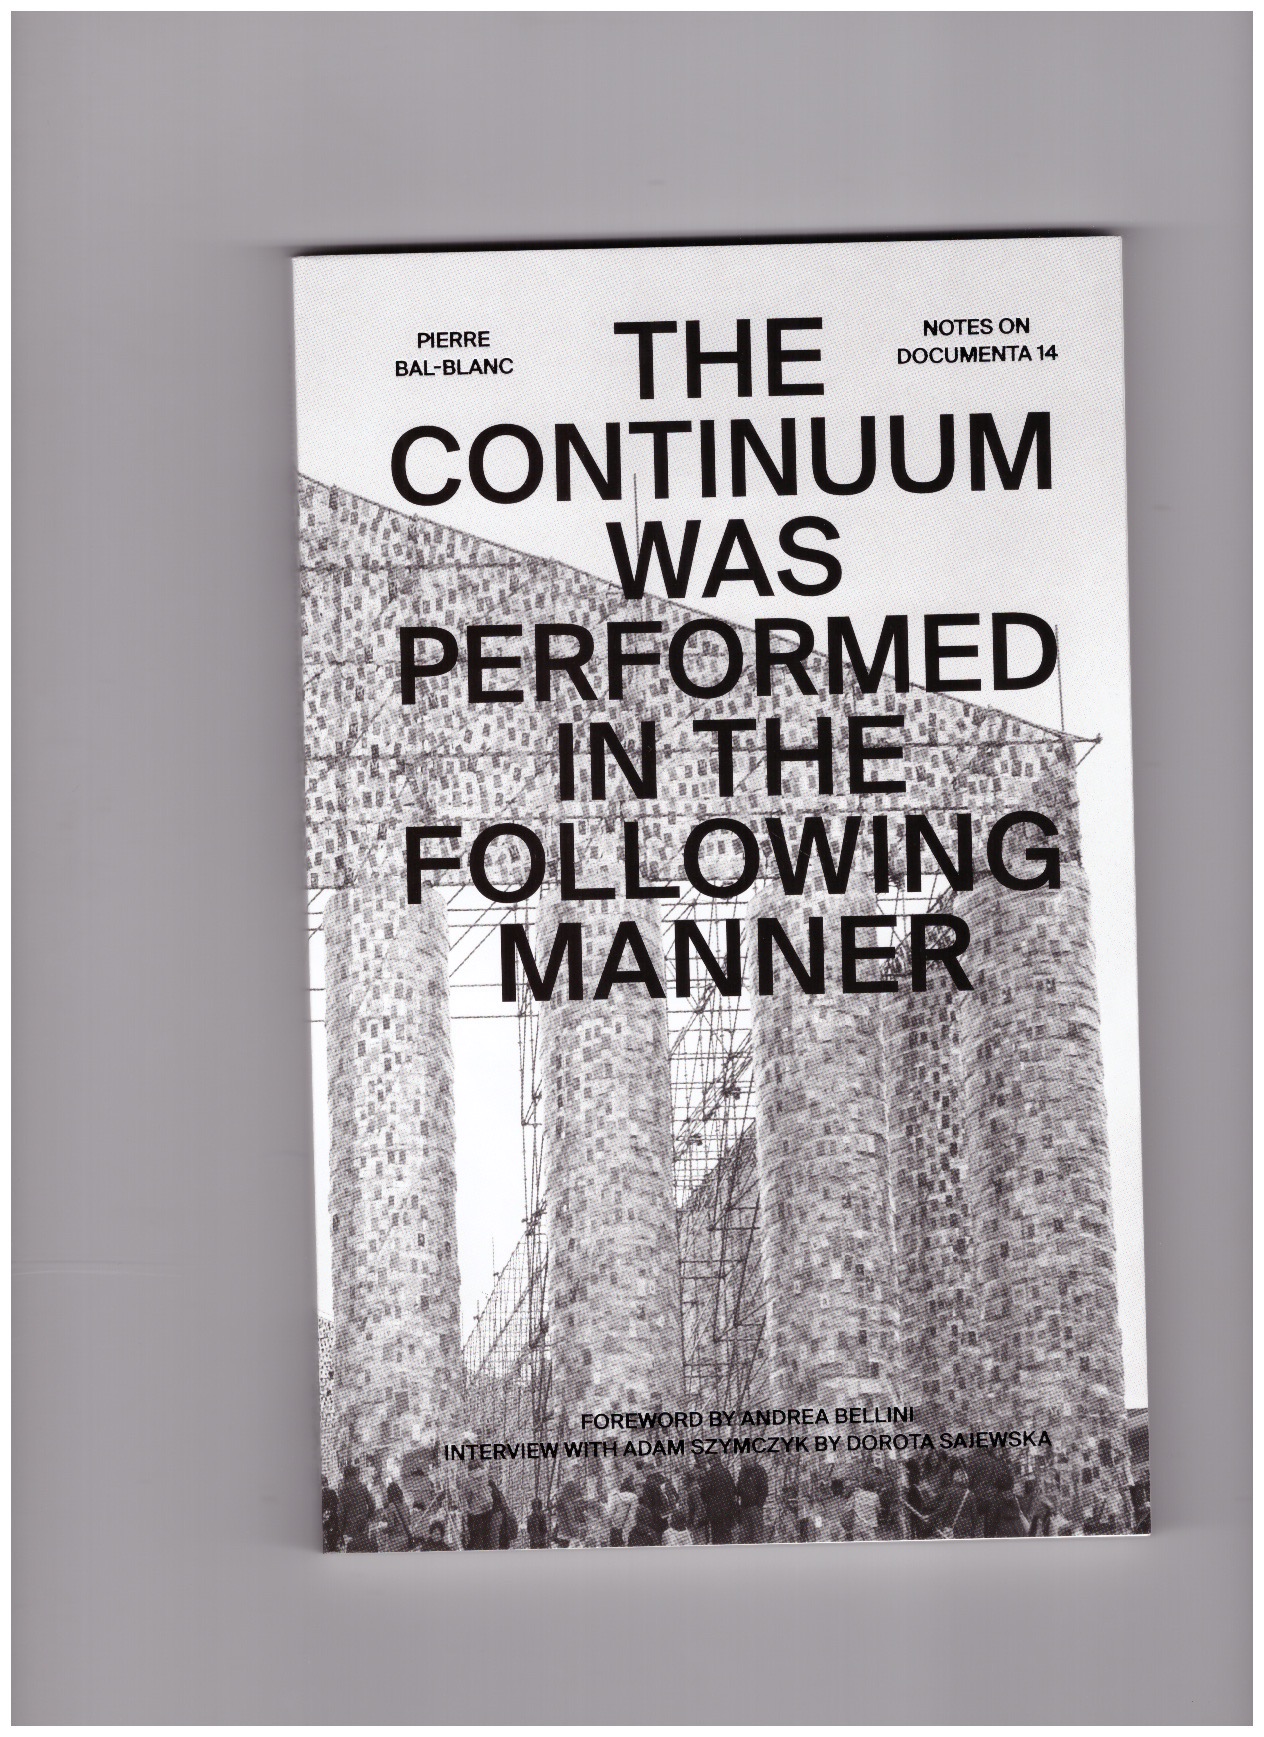 BAL-BLANC, Pierre - The Continuum Was Performed in the Following Manner – Notes on documenta 14